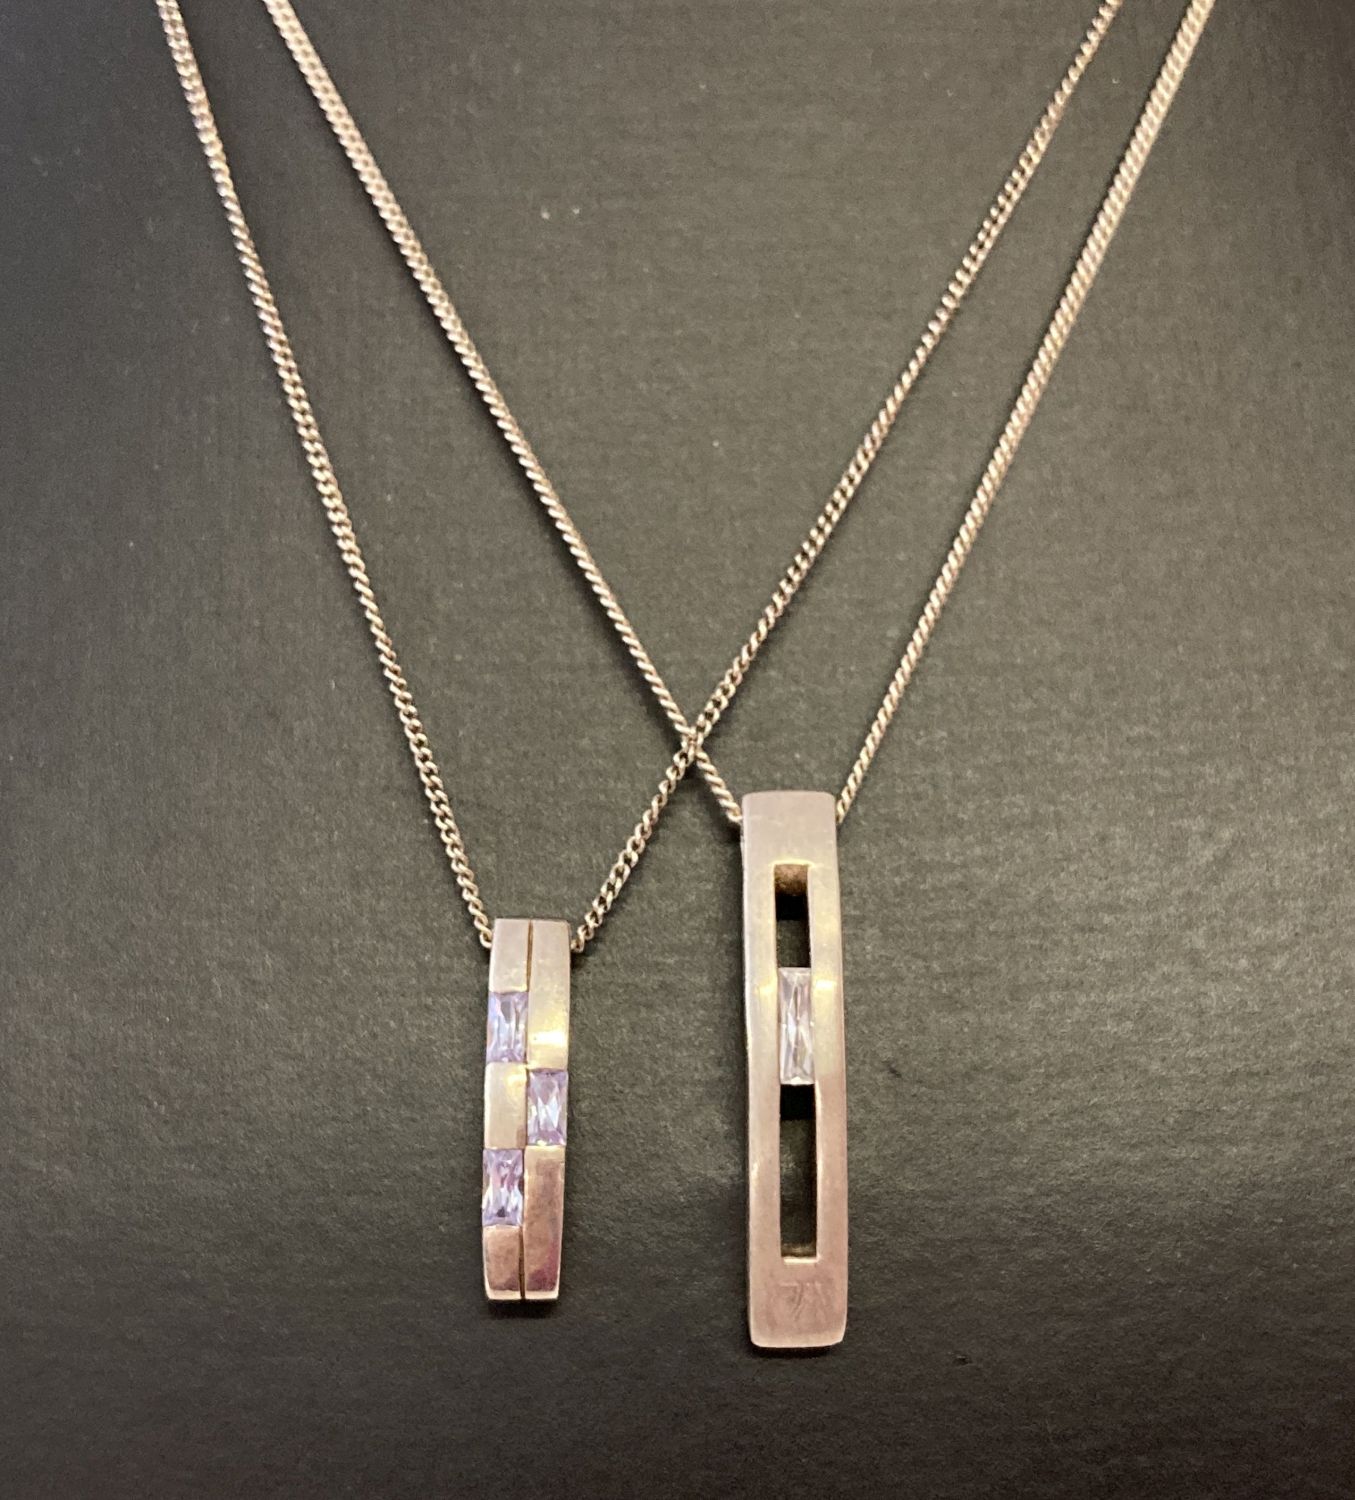 2 modern design silver necklaces. A fine curb chain with rectangular drop pendant set with a clear